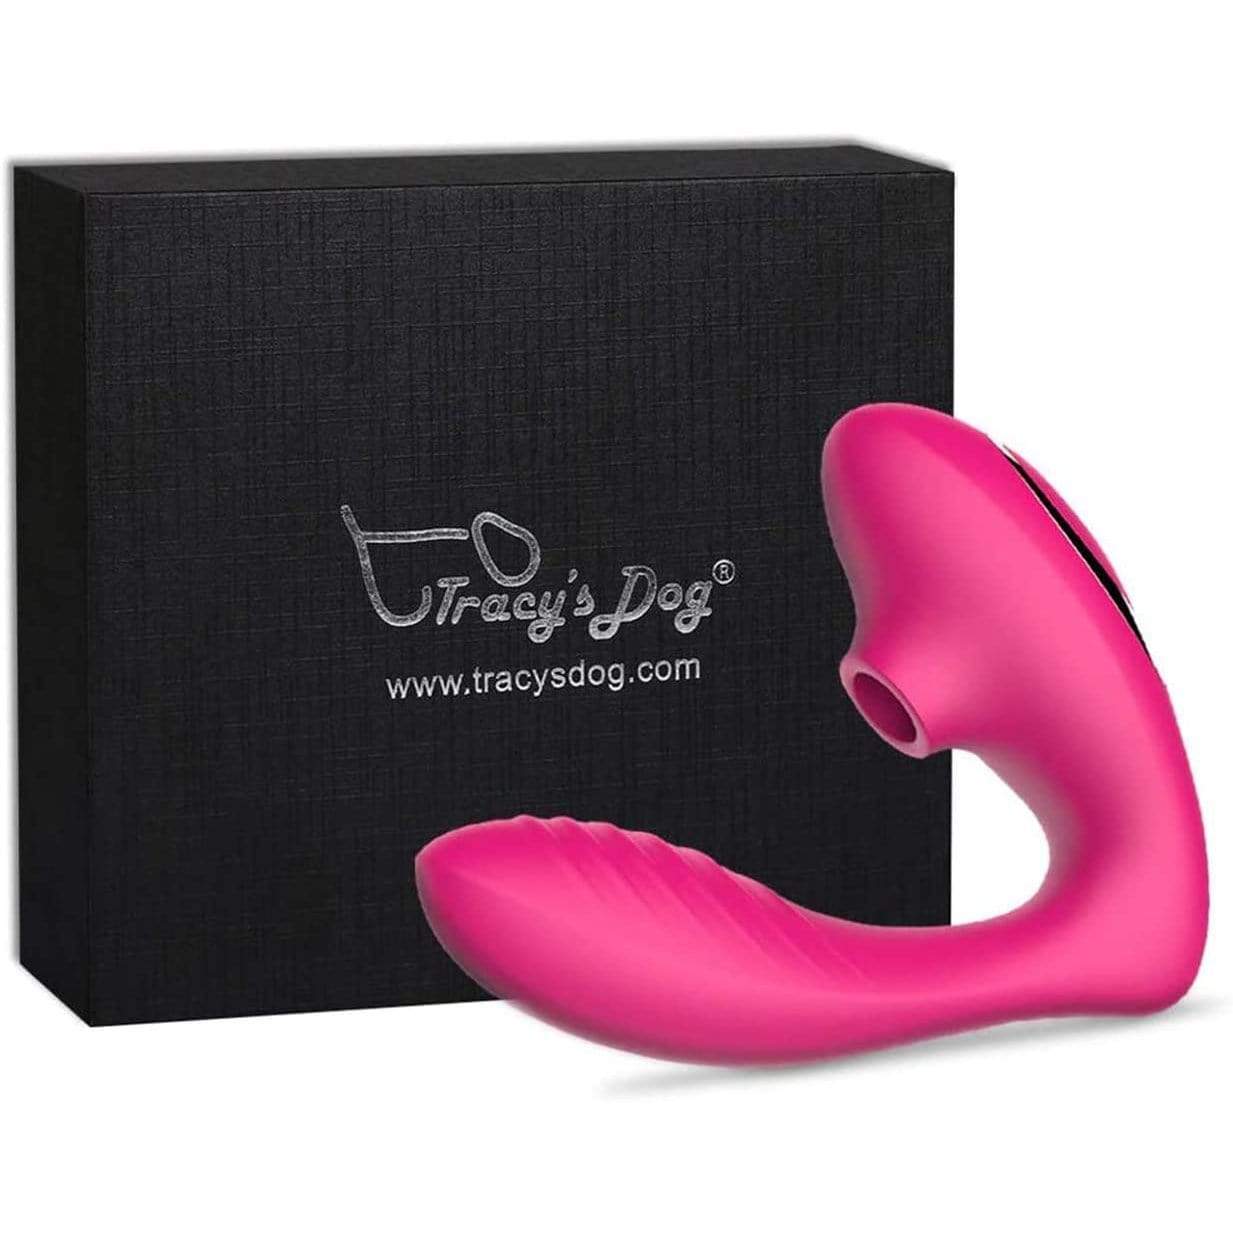 Tracy's Dog -  Clitoral Air Stimulator Vibrator (Pink) Clit Massager (Vibration) Rechargeable 6972725980025 CherryAffairs